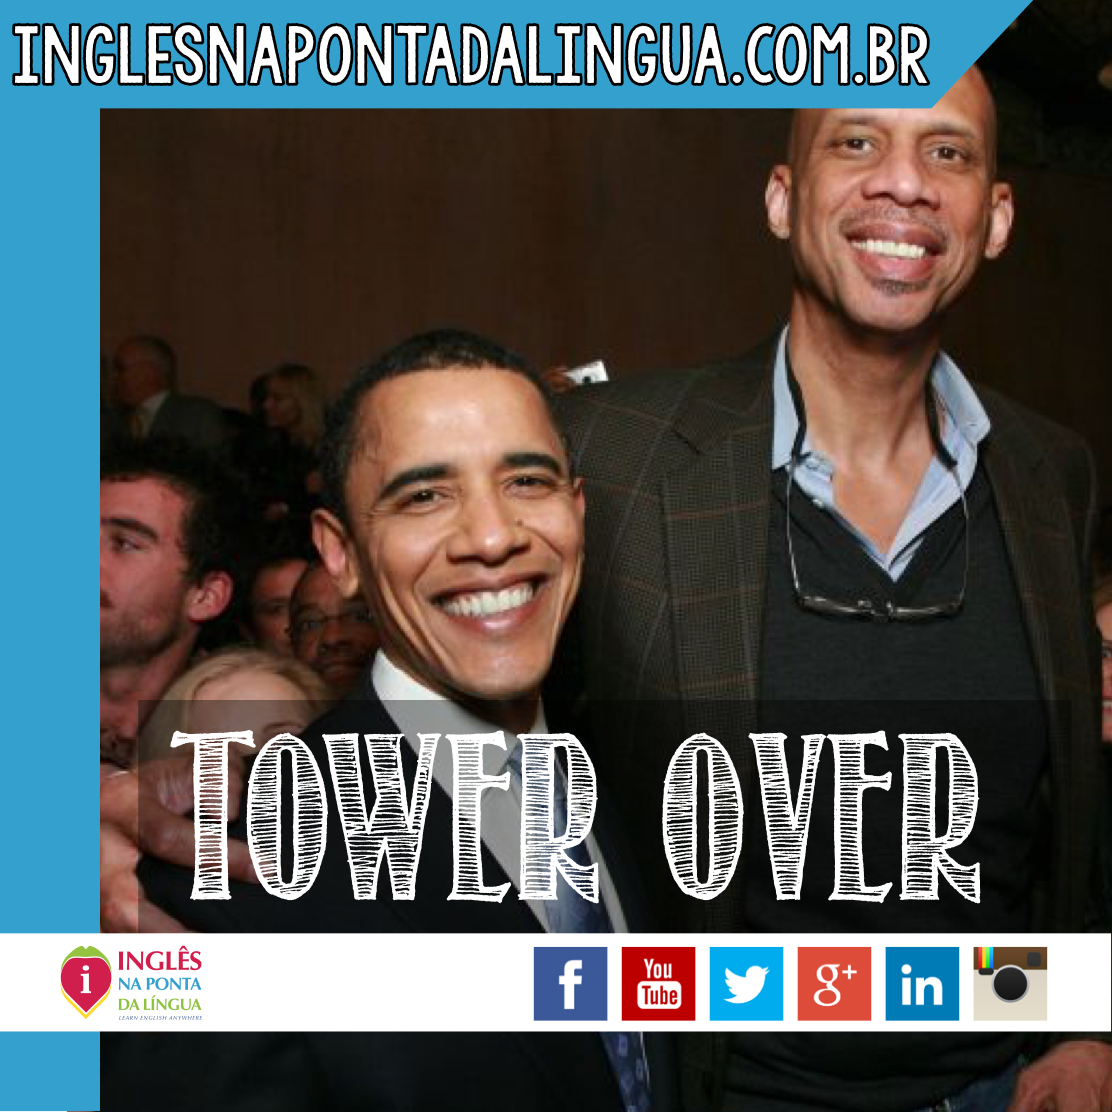 O que significa TOWER OVER?